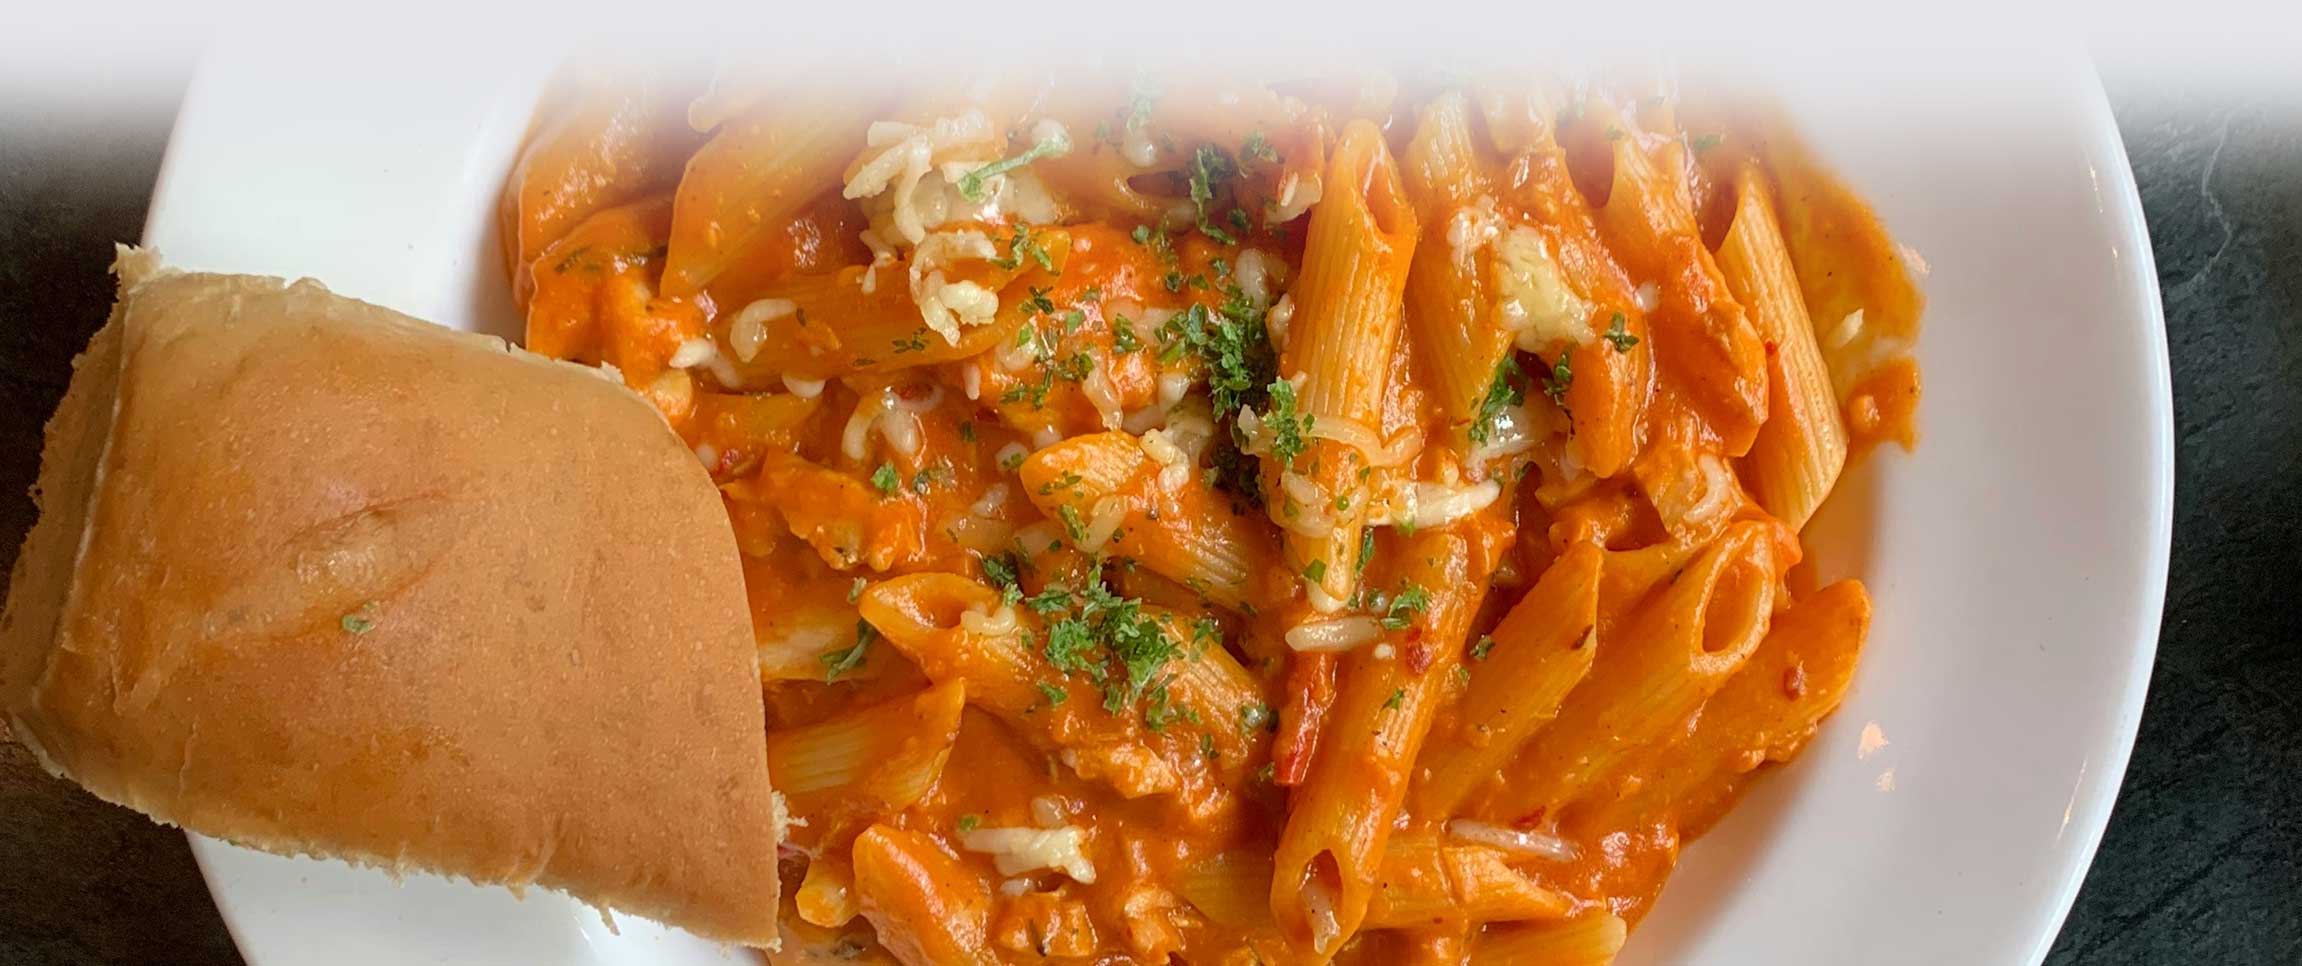 Penne Pasta in Tomato and Cream Cheese Sauce